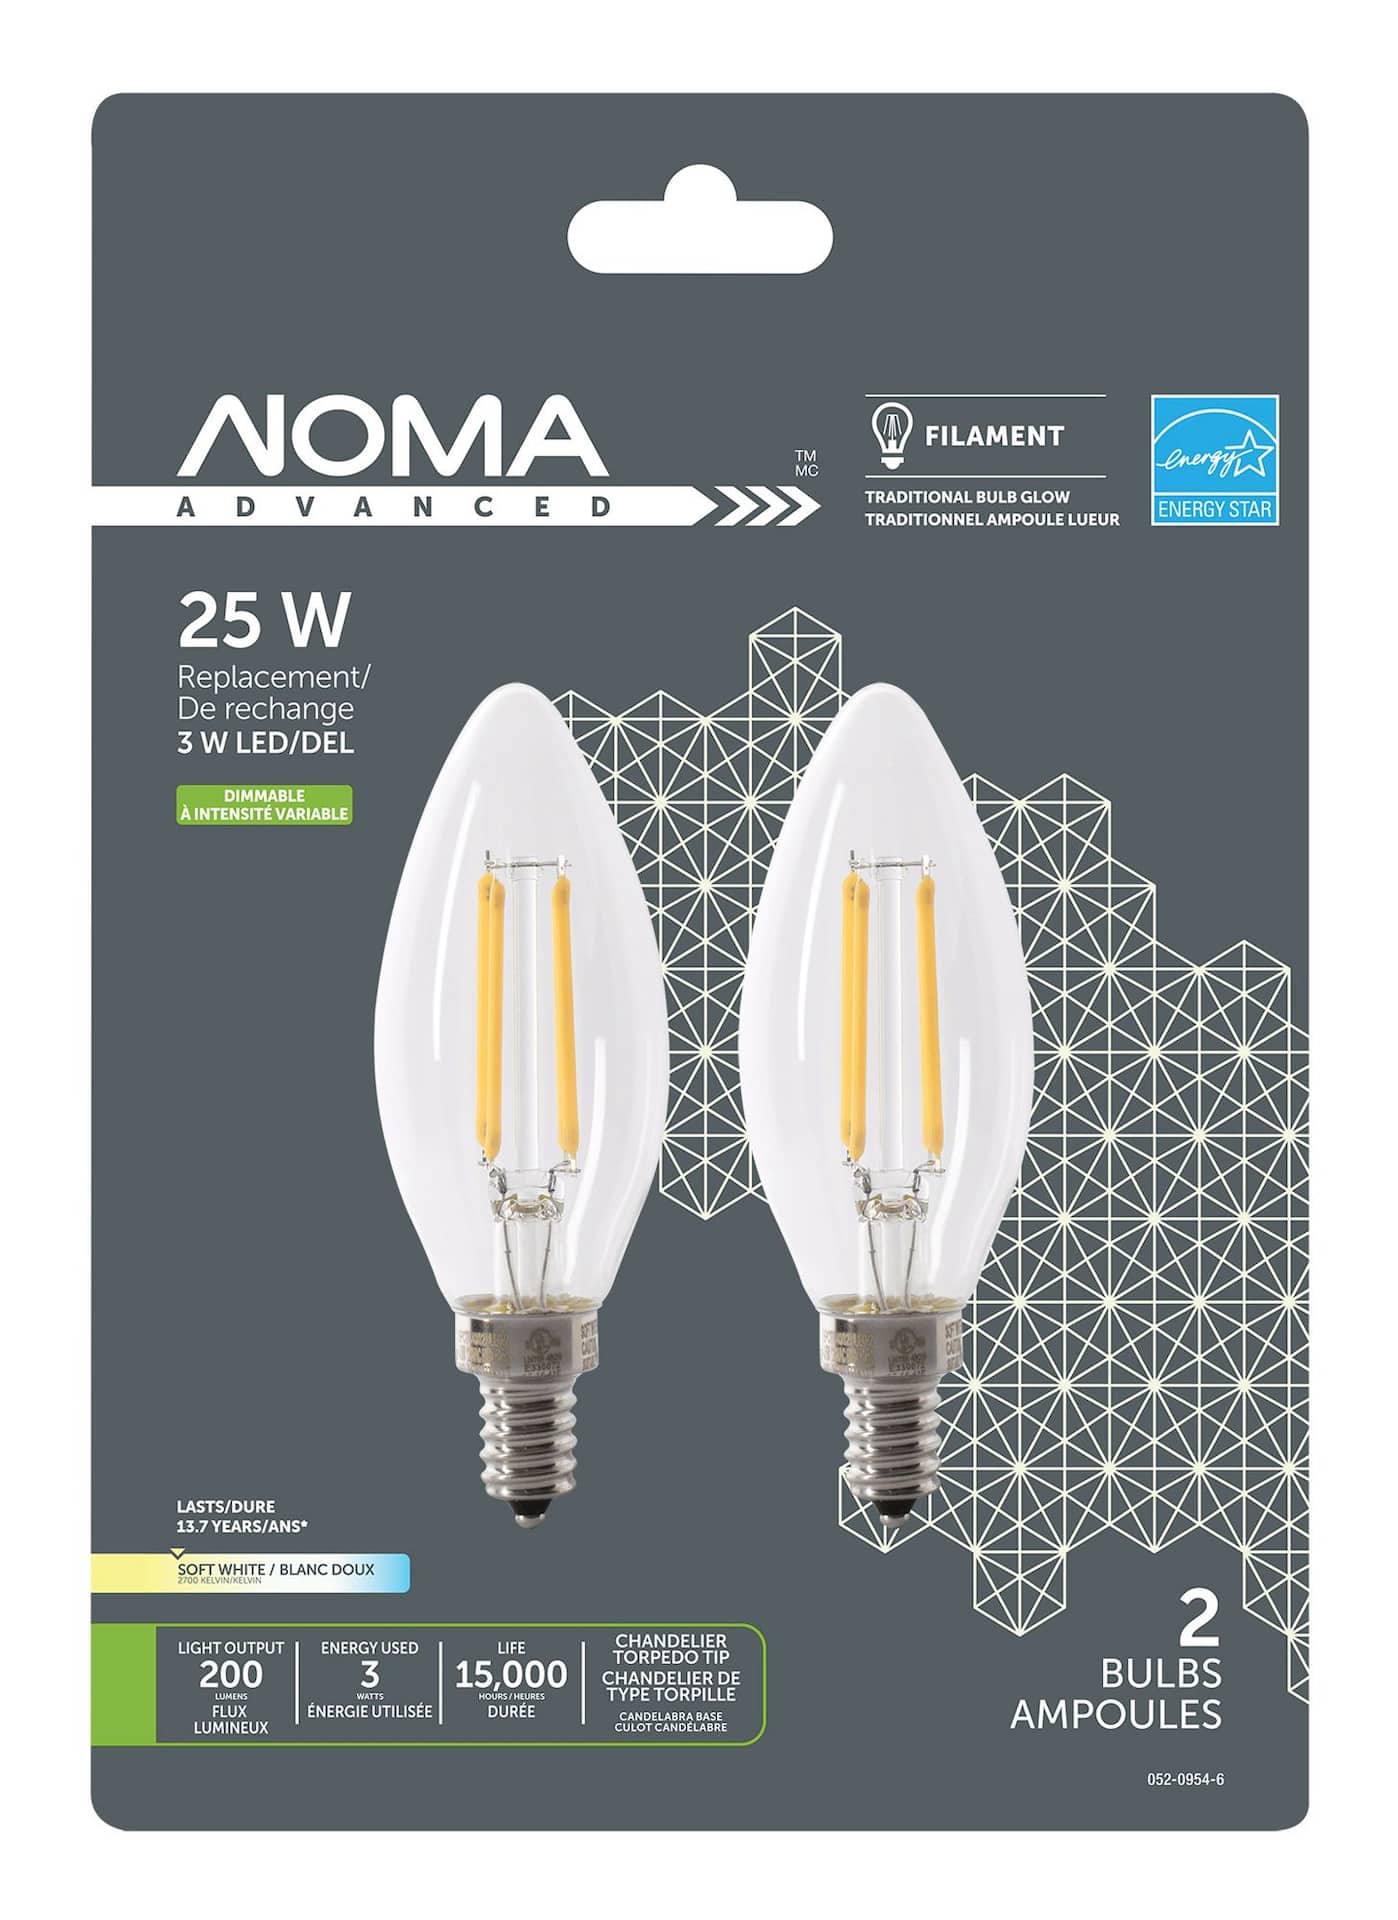 Noma LED Chandelier 25W E12 Base Torpedo Clear Dimmable Soft White, 2-pk  Canadian Tire